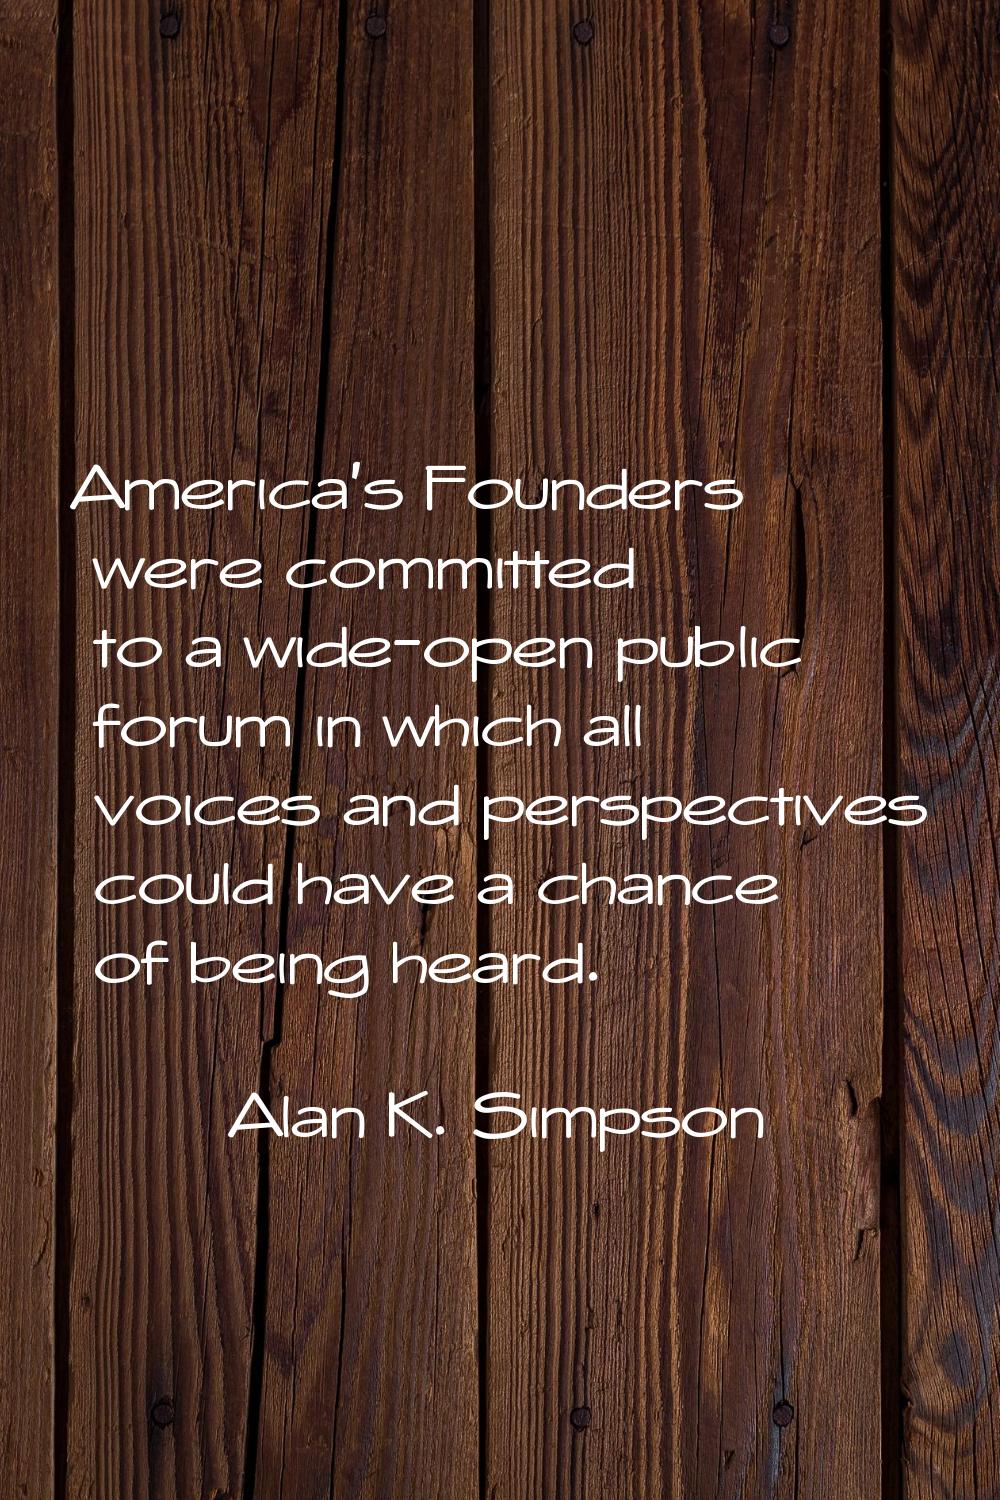 America's Founders were committed to a wide-open public forum in which all voices and perspectives 